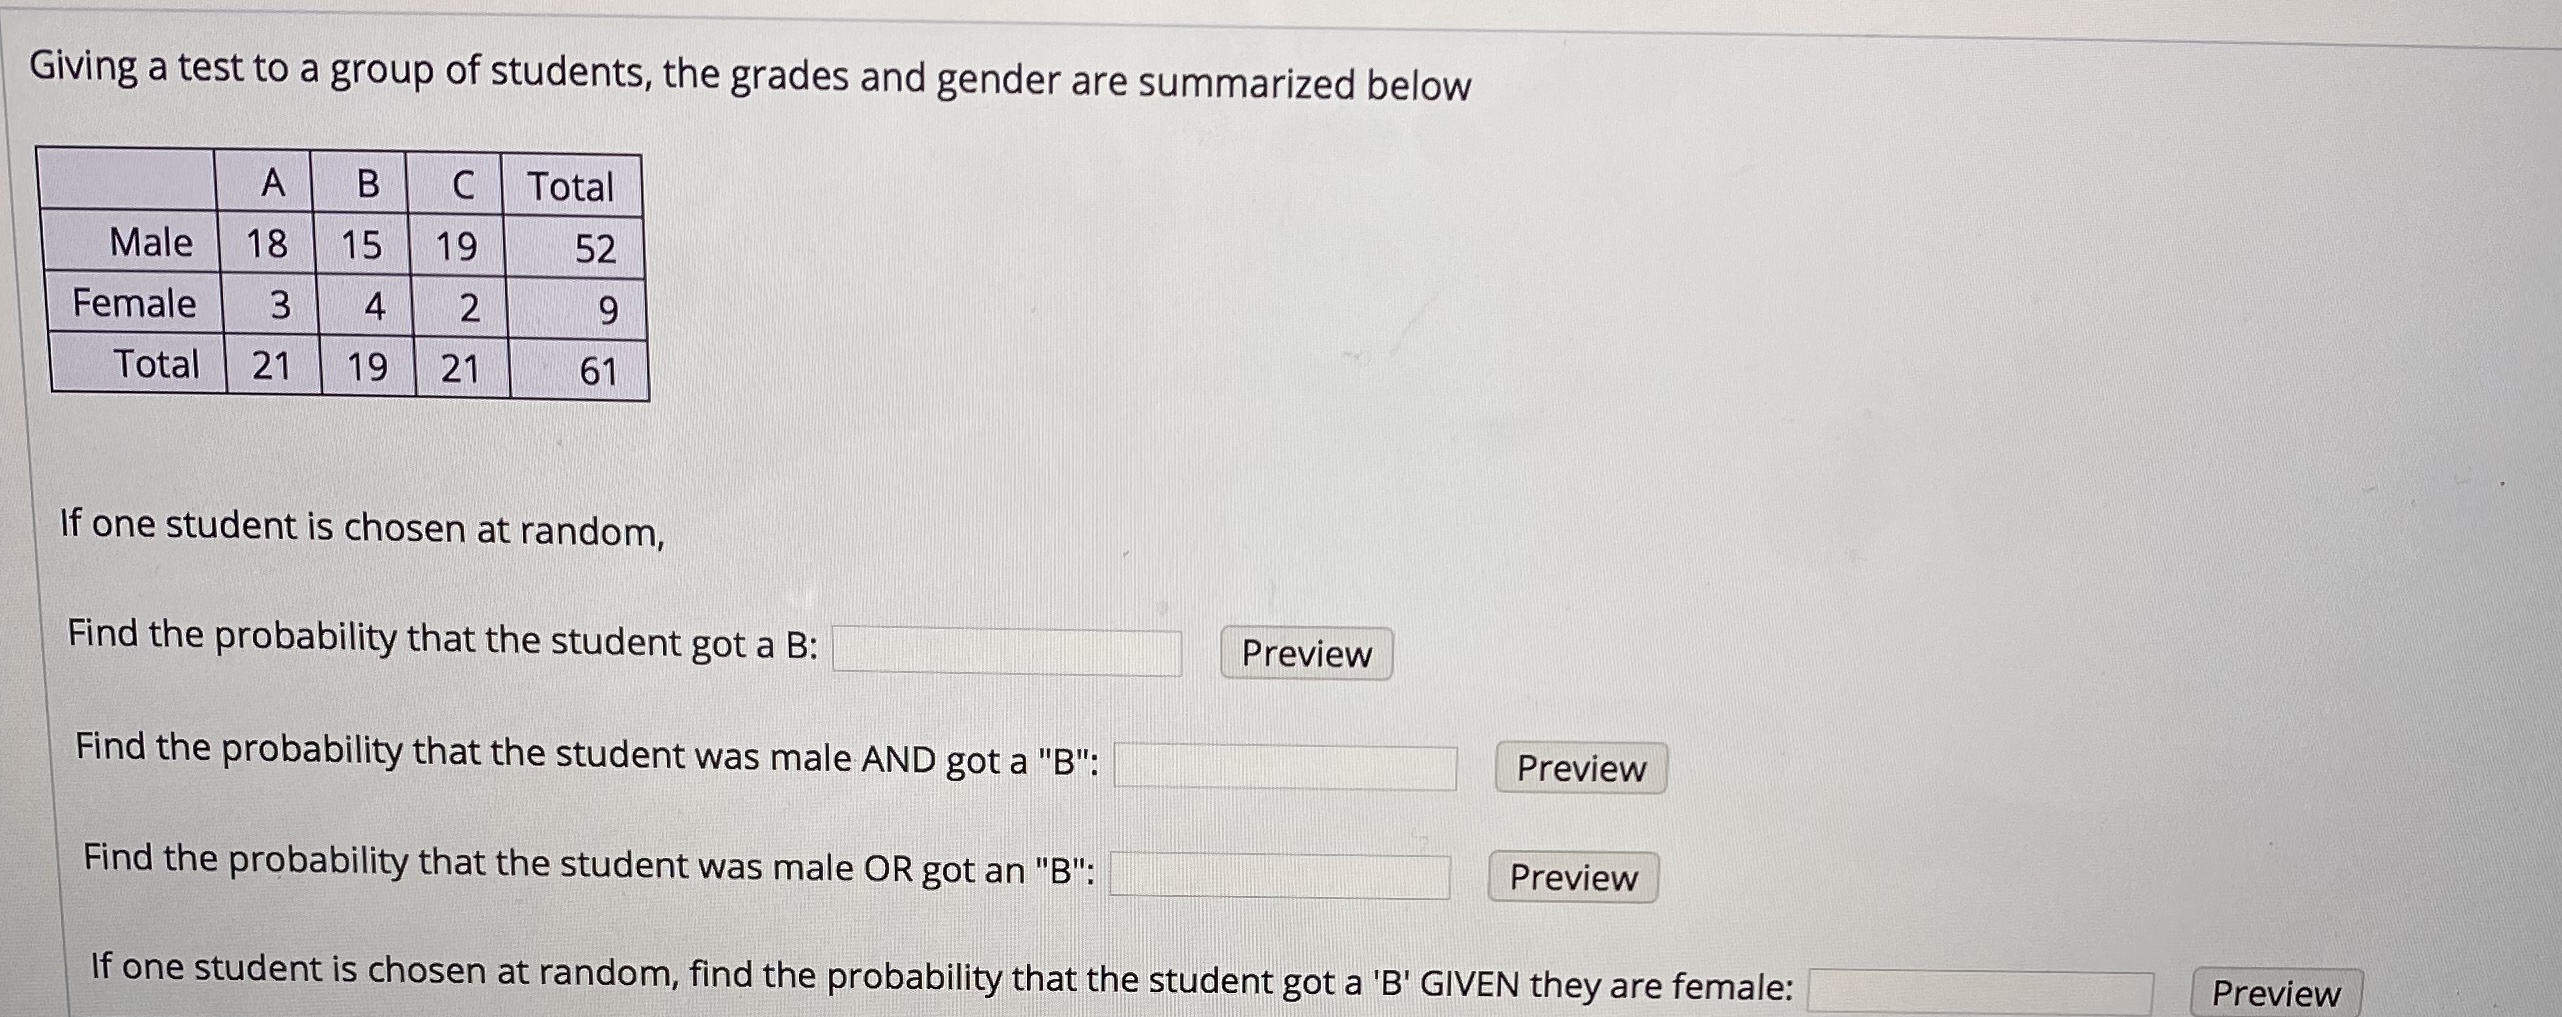 Giving a test to a group of students, the grades and gender are summarized below
B
Total
Male
18
15
19
52
Female
3
4
Total
21
19
21
61
If one student is chosen at random,
Find the probability that the student got a B:
Preview
Find the probability that the student was male AND got a "B":
Preview
Find the probability that the student was male OR got an "B":
Preview
If one student is chosen at random, find the probability that the student got a 'B' GIVEN they are female:
Preview
